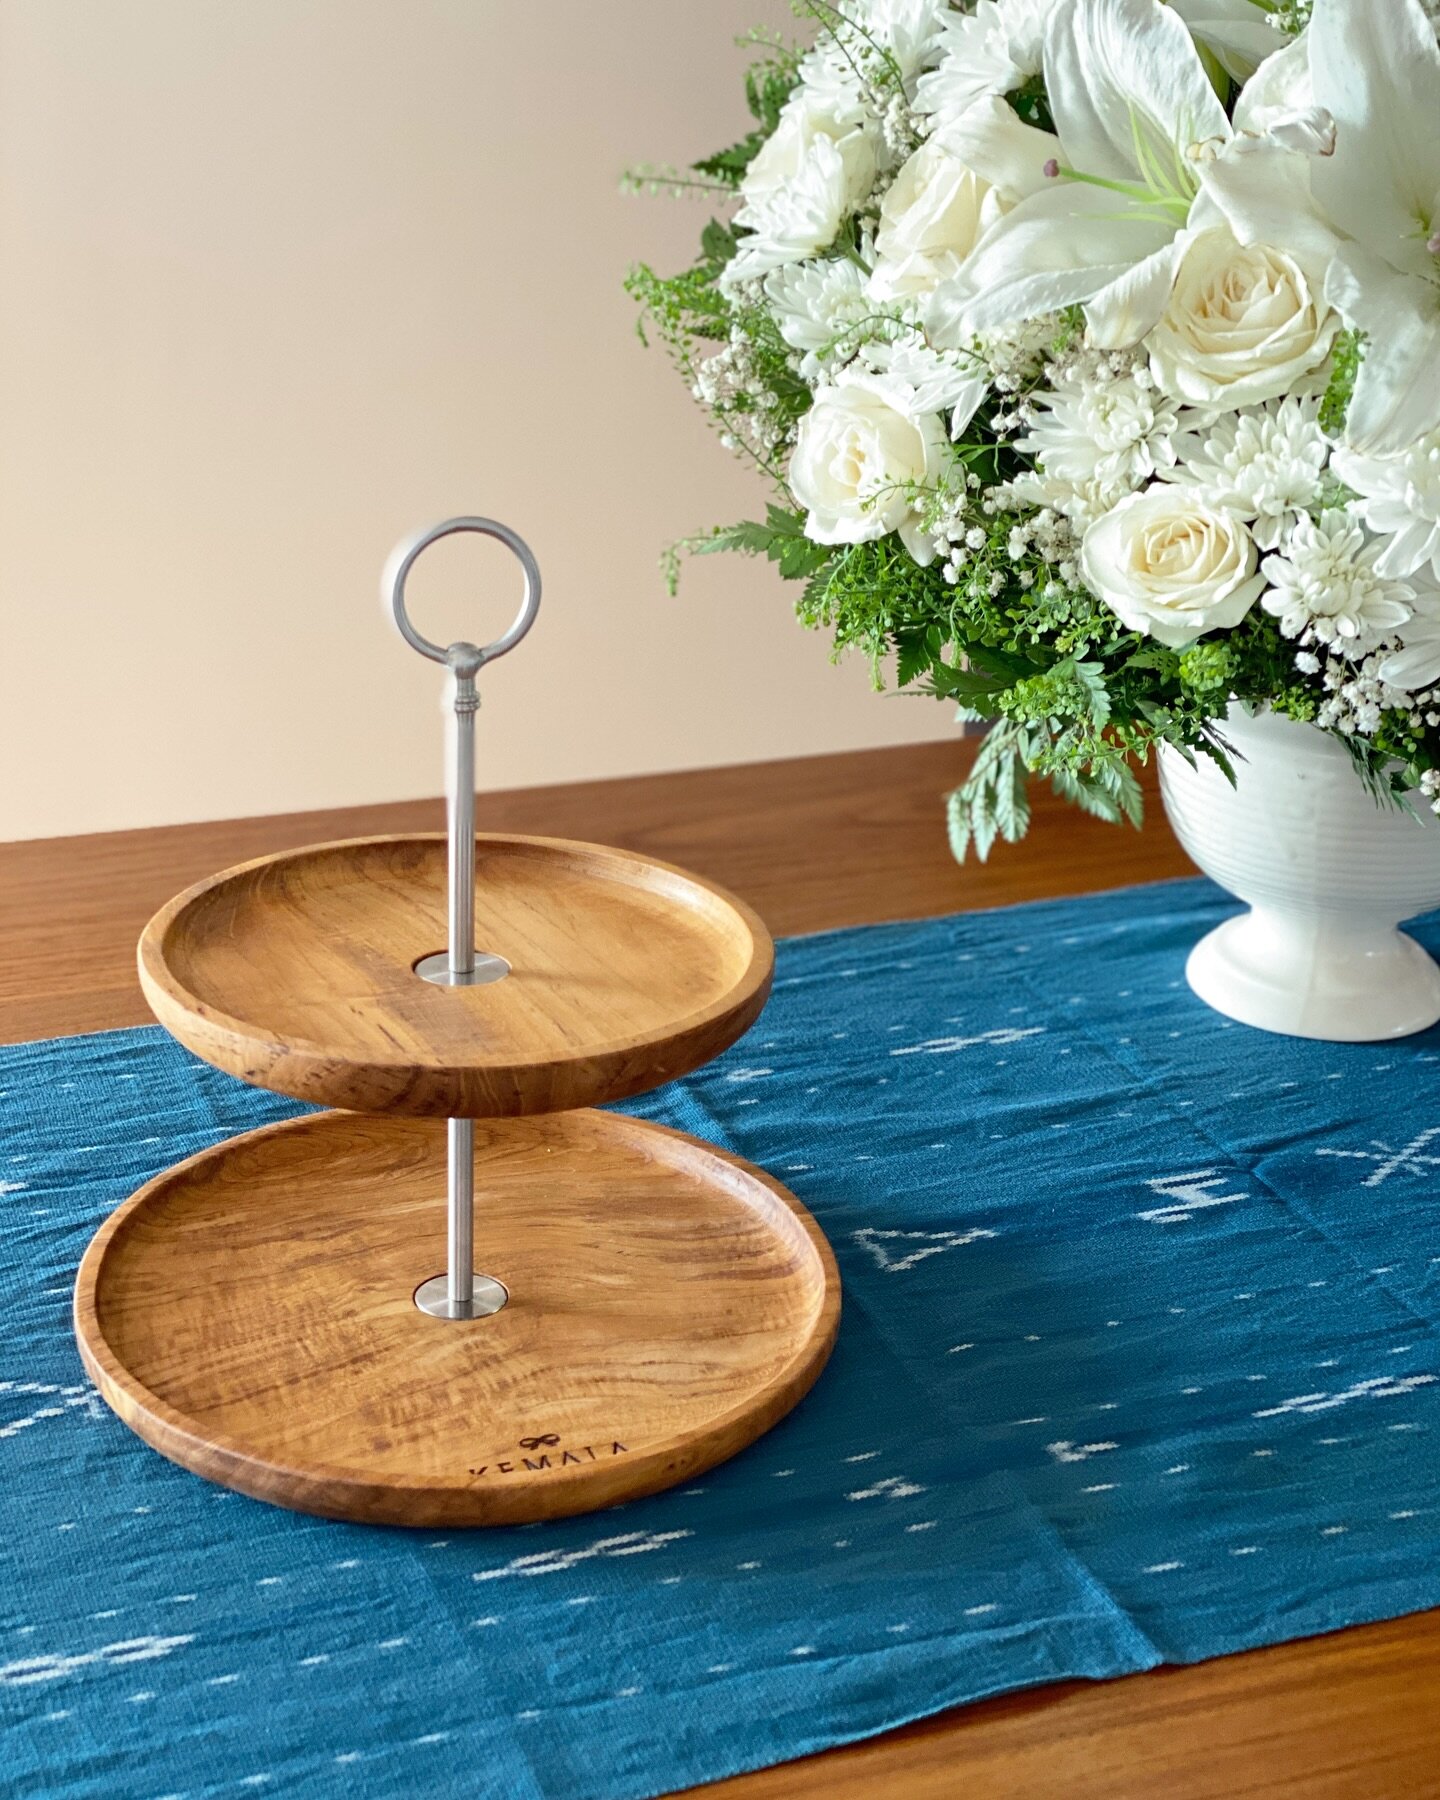 Our popular Two-Tier Teak Cake Stand has made a come back! This modular set of plates and stainless steel handles can be flat packed and they look so pretty for a table centre piece. Host your next event with this sleek and functional piece!!